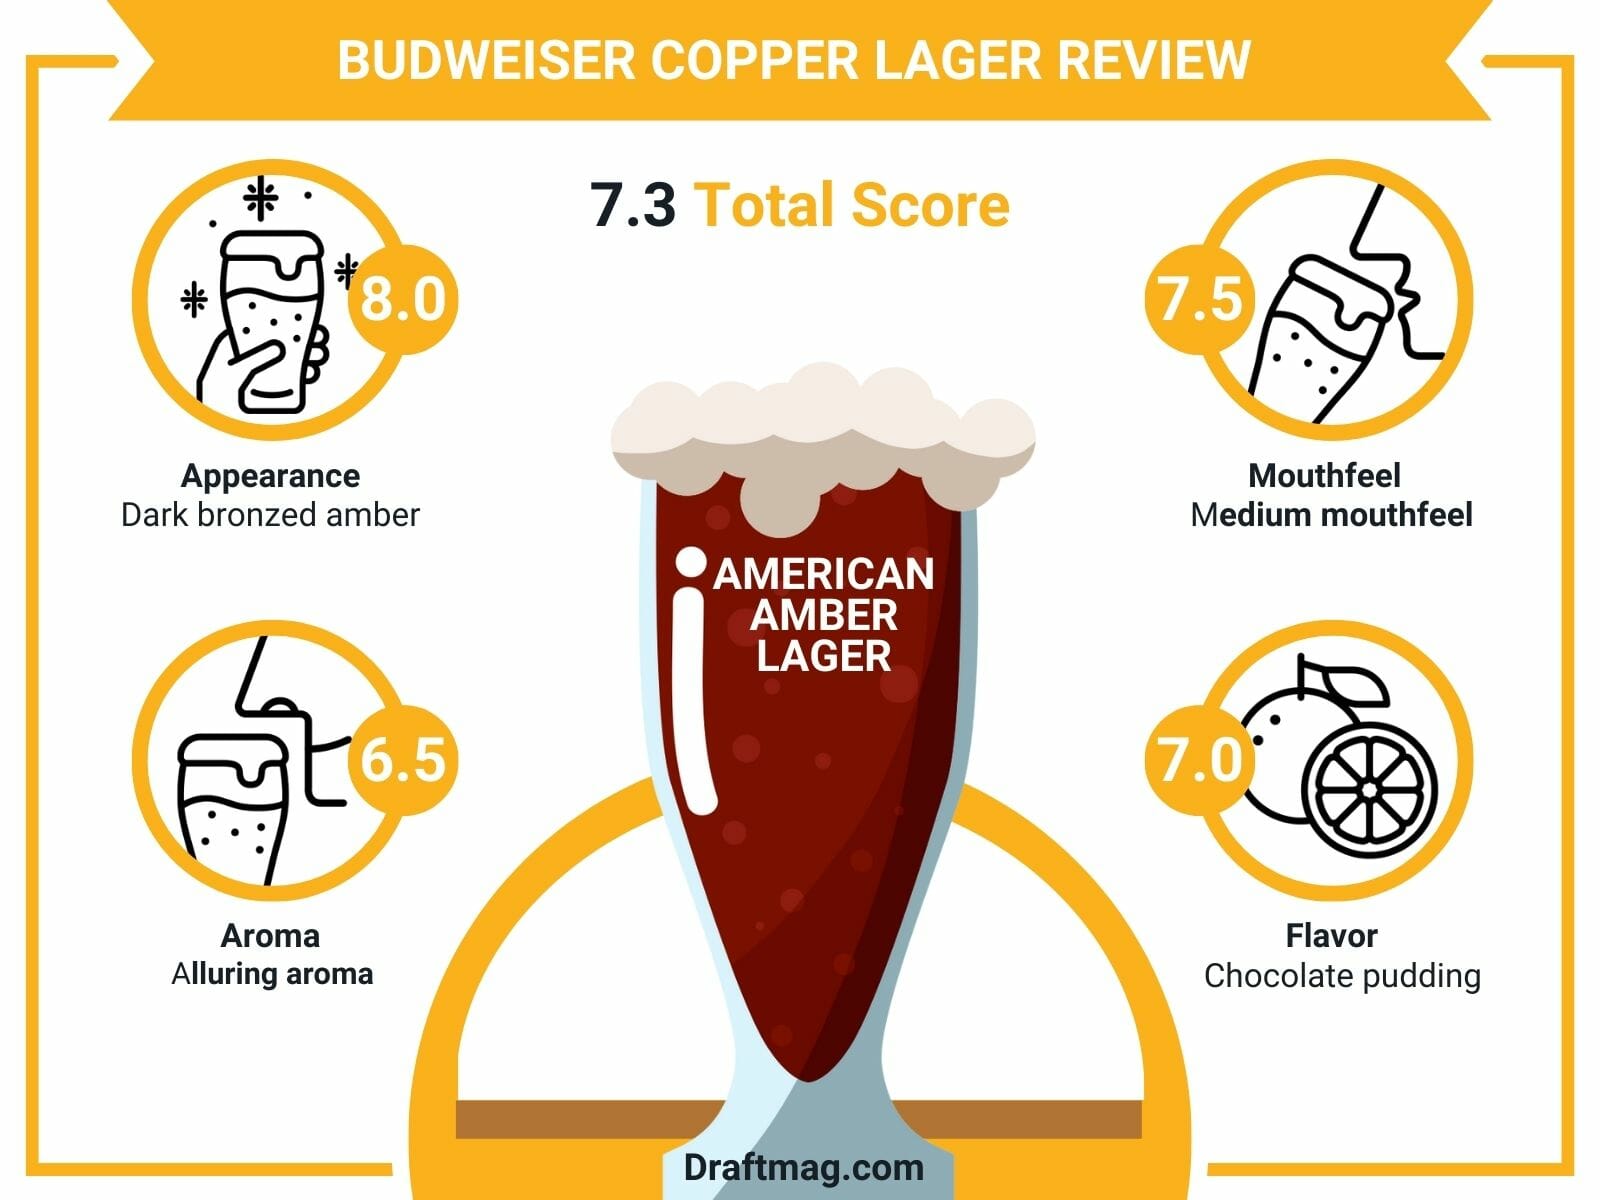 Budweiser Copper Lager Review Infographic